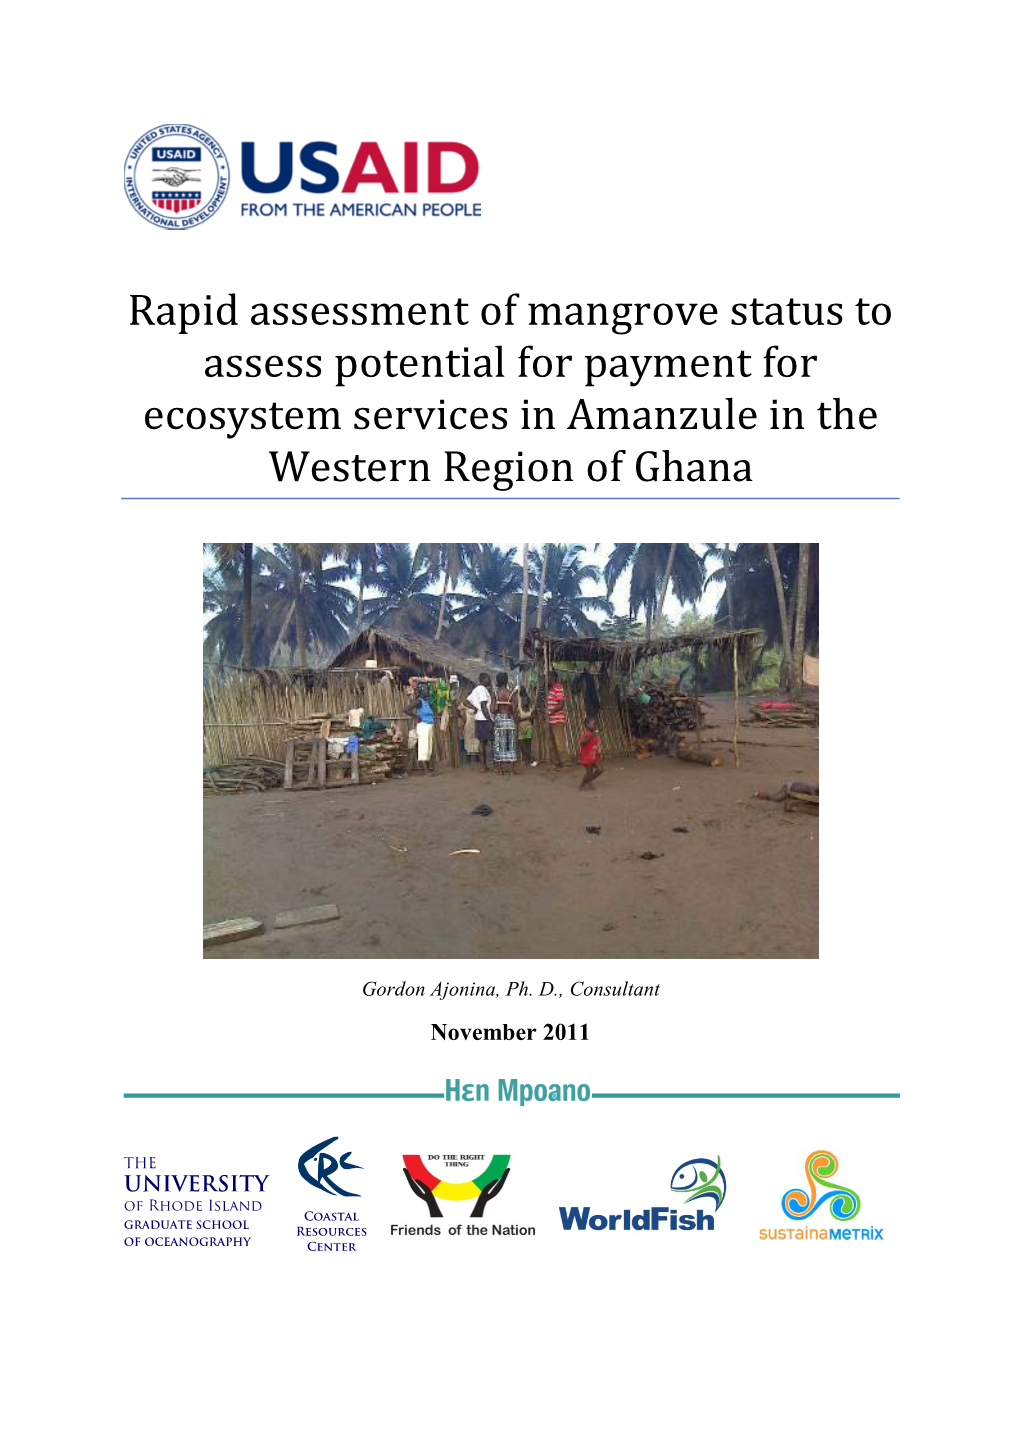 Rapid Assessment of Mangrove Status to Assess Potential for Payment for Ecosystem Services in Am Anzule in the Western Region of Ghana